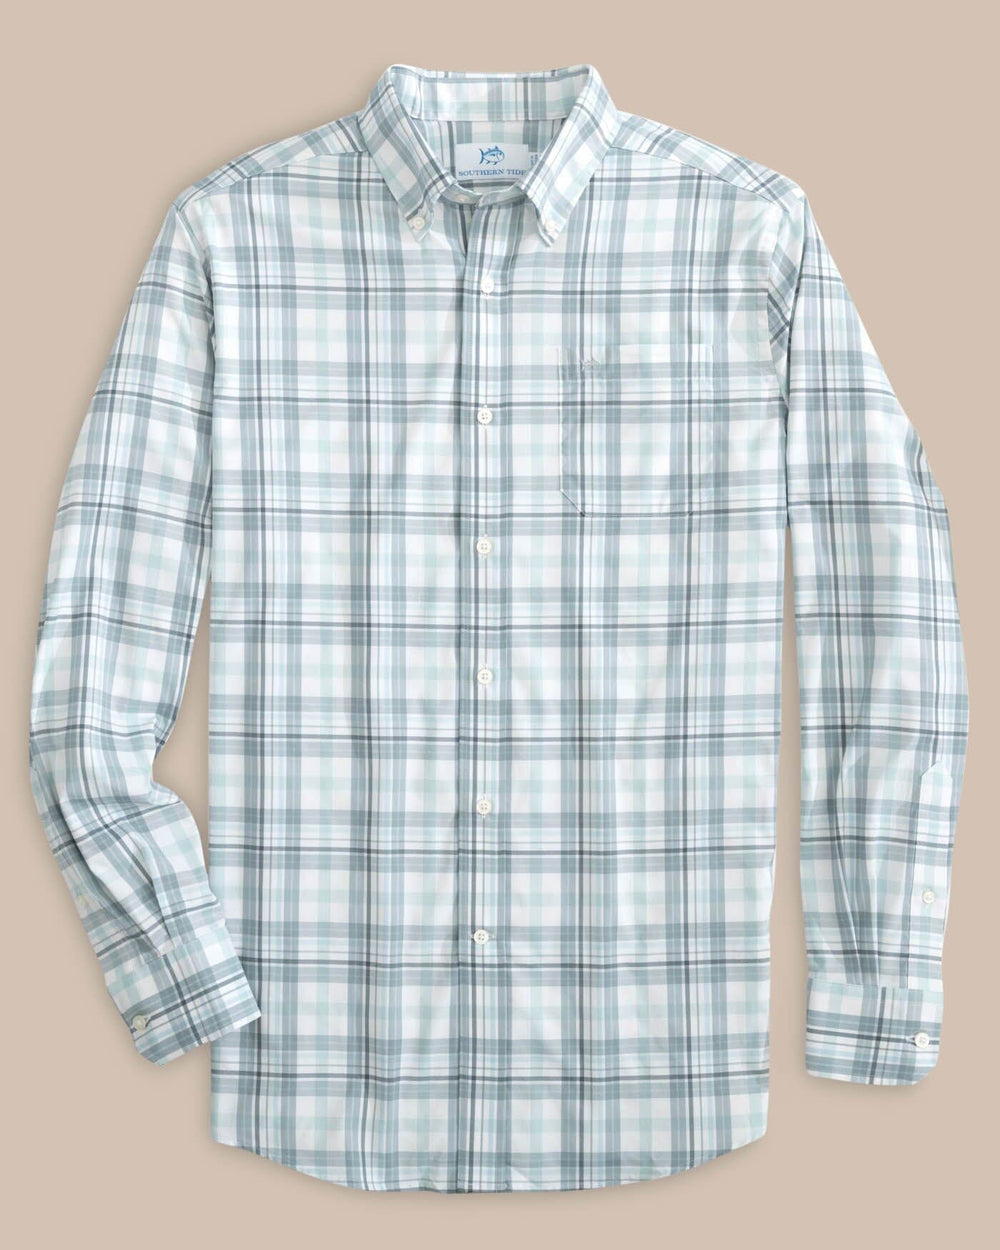 The front view of the Southern Tide Durwood Plaid Intercoastal Sport Shirts by Southern Tide - Summer Aqua